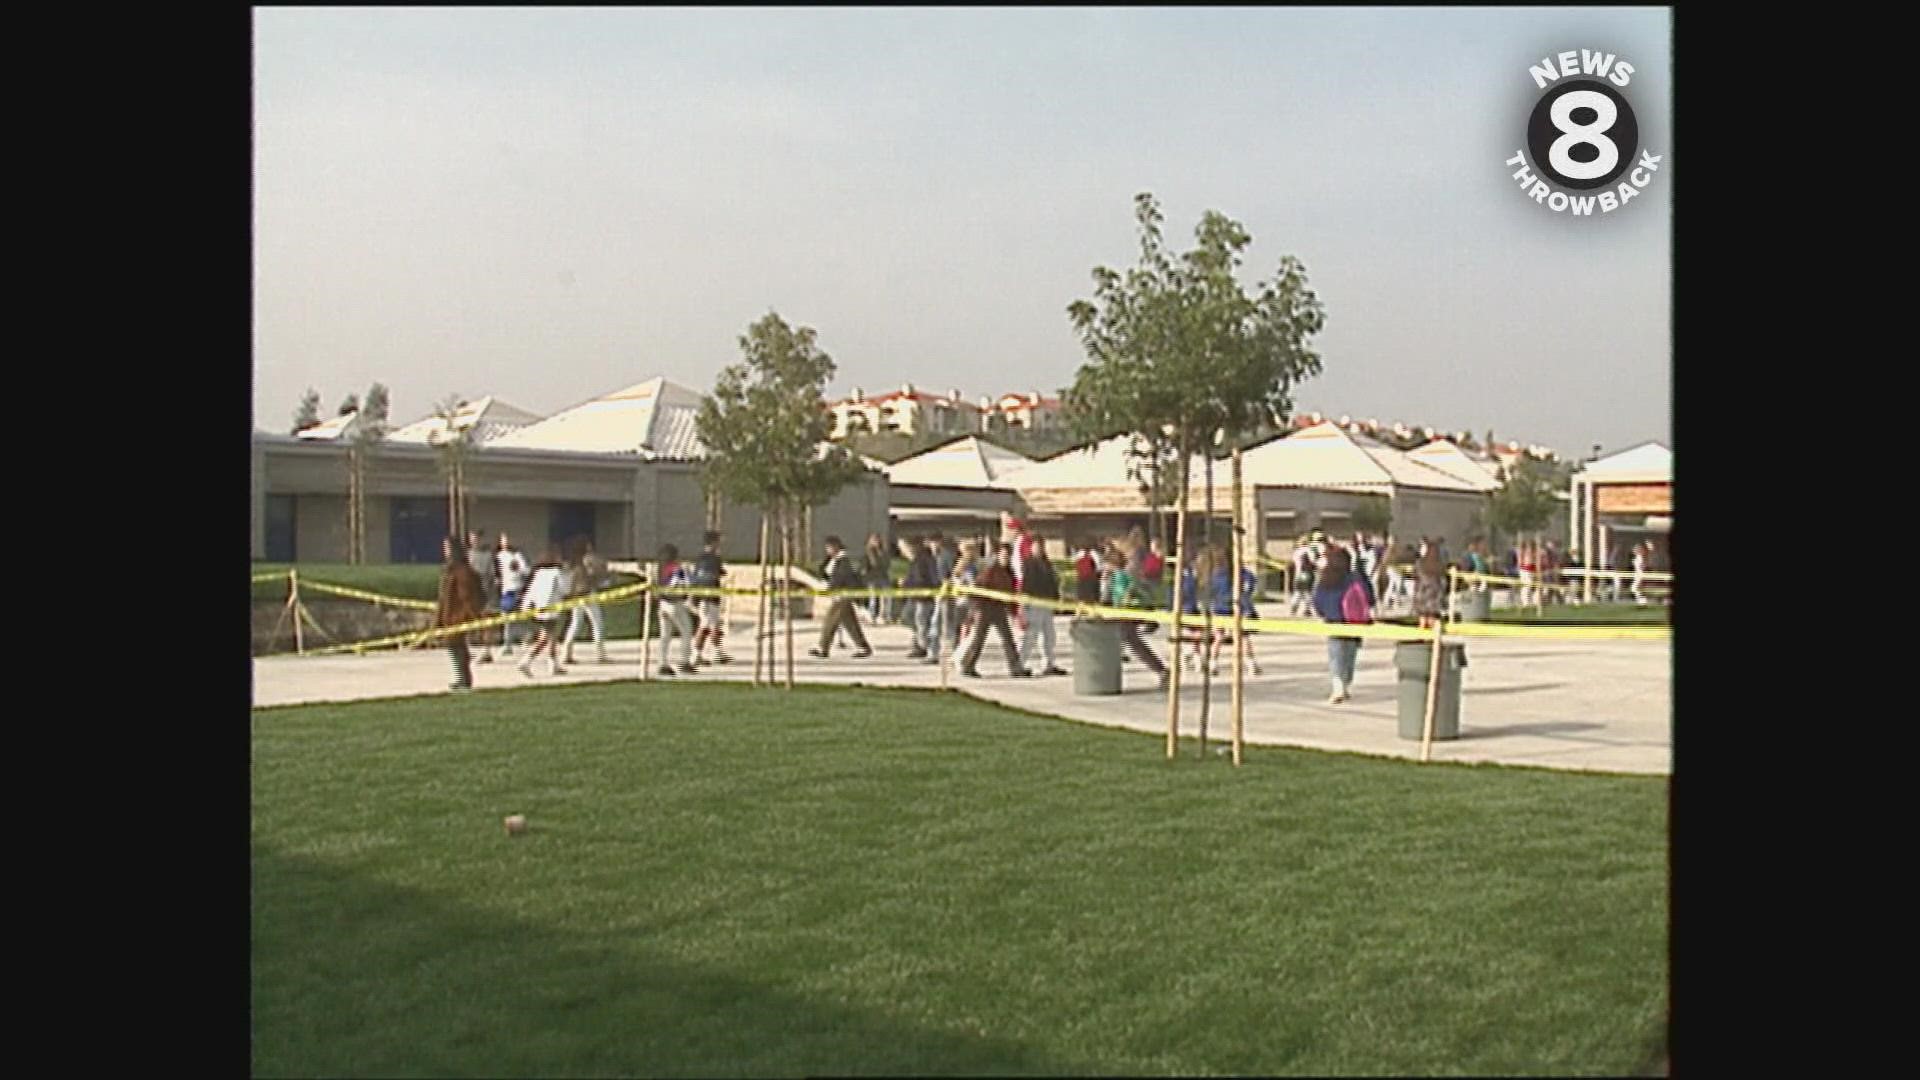 In this News 8 throwback, a beautiful high school opens in San Diego's North County back in 1991.